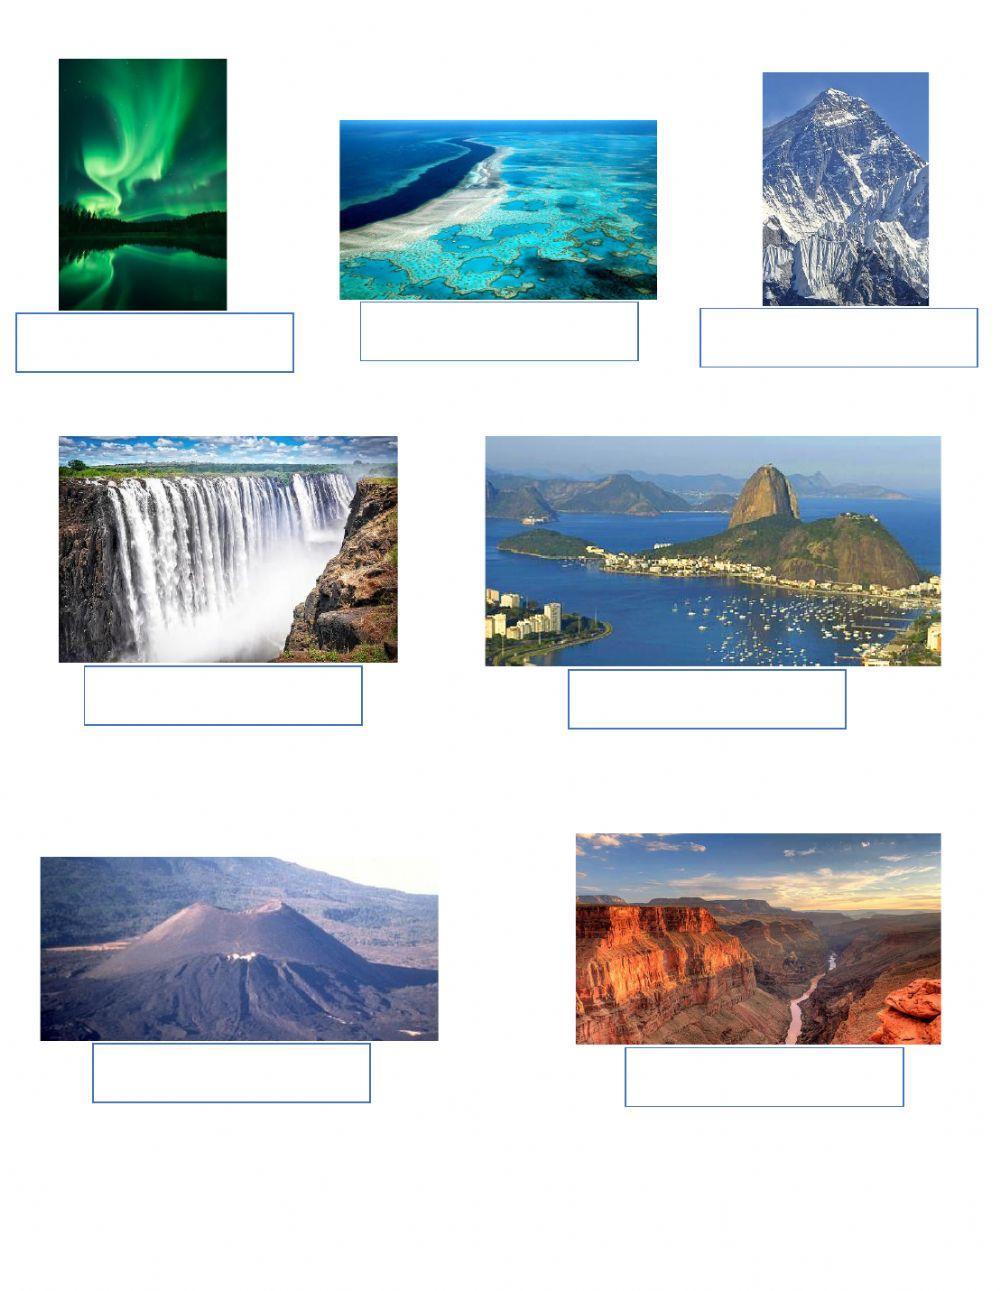 Seven Wonders of the natural world